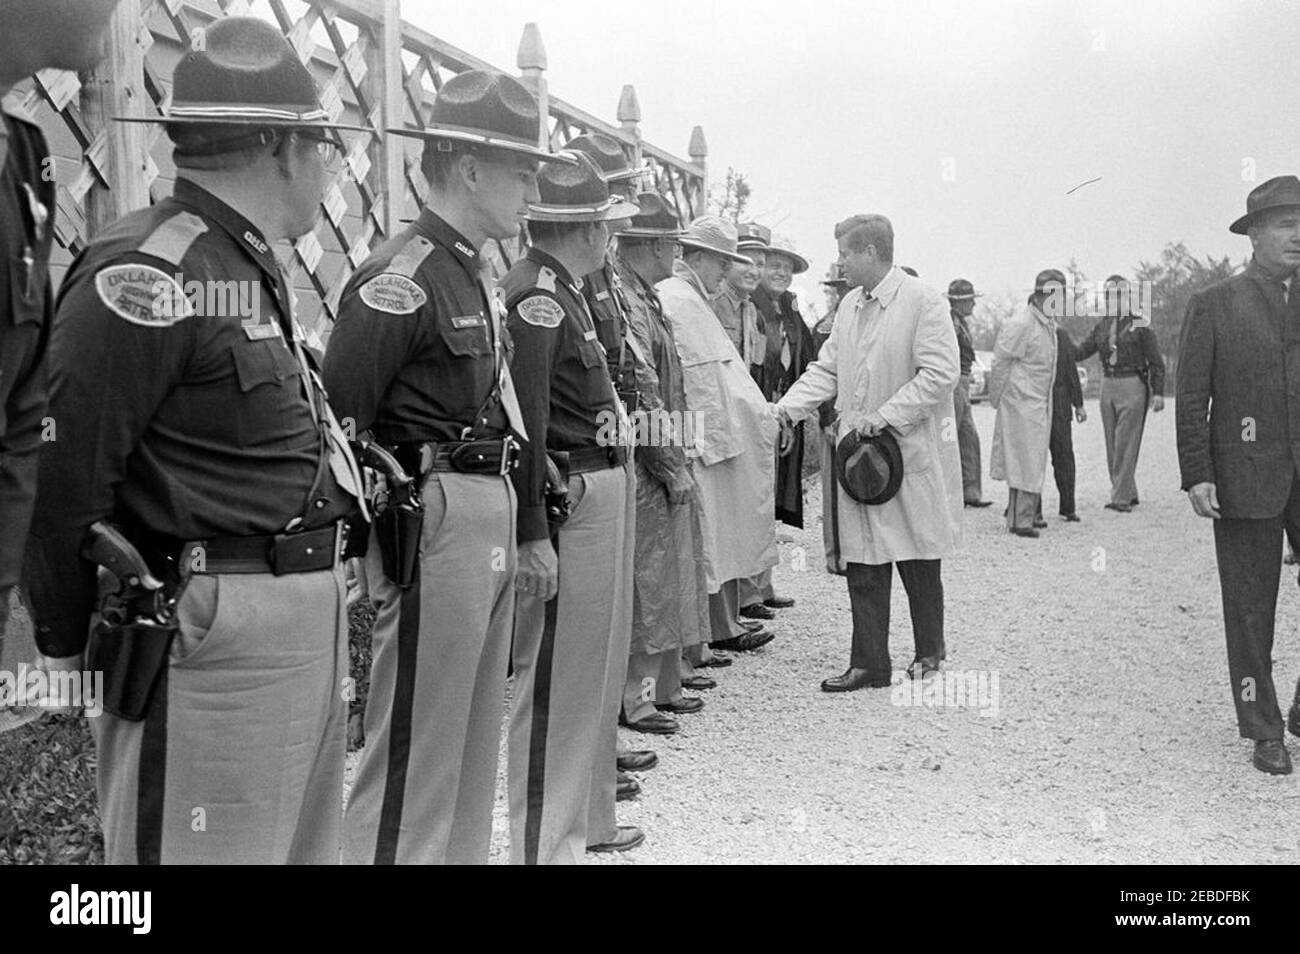 Trip to Oklahoma: President Kennedy with Senator Robert S. Kerr (Oklahoma) at the Kermac Angus Ranch, Poteau, Oklahoma. President John F. Kennedy meets with members of the Oklahoma Highway Patrol. President Kennedy (center, holding hat); others unidentified. Kermac Angus Ranch, Poteau, Oklahoma. Stock Photo